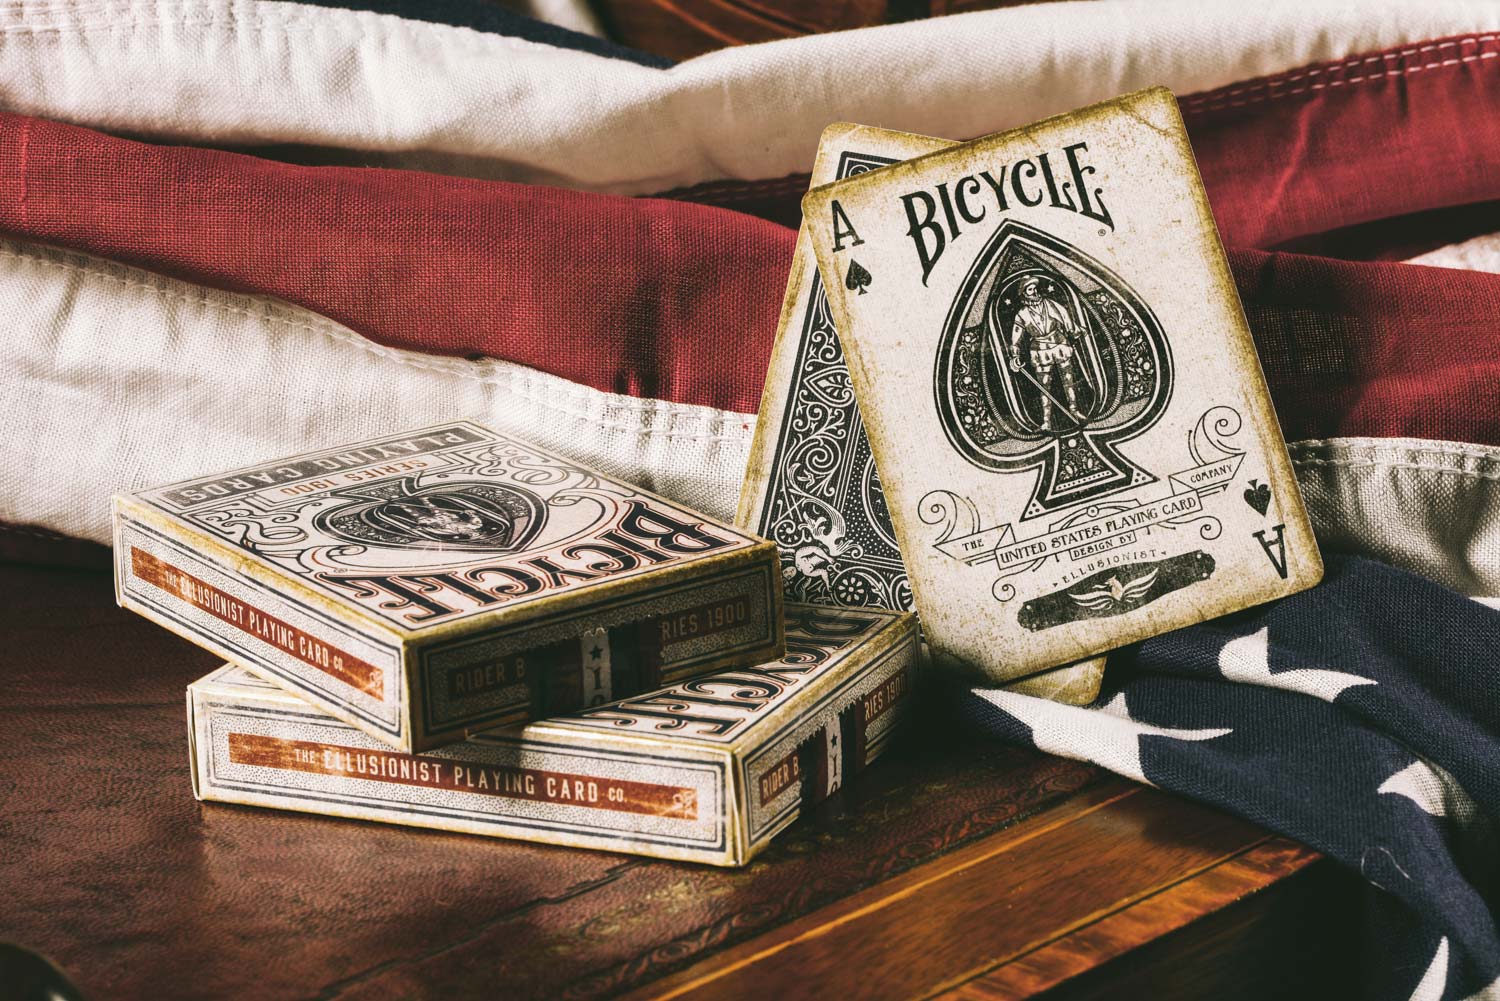 Bicycle 1900 - Blue by USPCC Crushed | Ellusionist